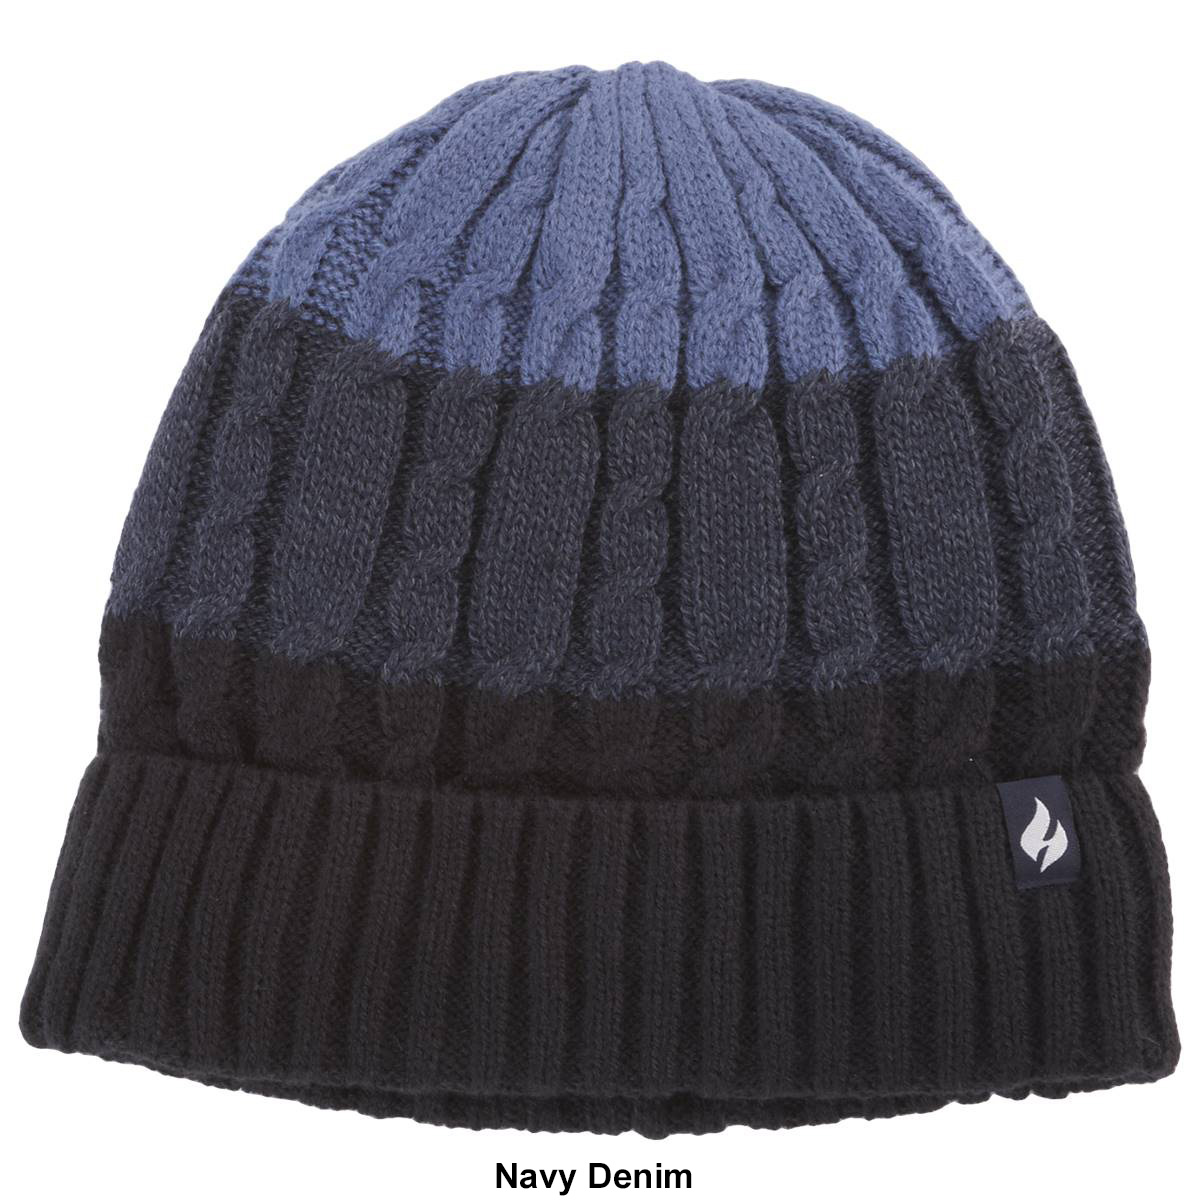 Mens Heat Holders(R) 3-Tone Cable Knit Hat W/ Turnover - Navy